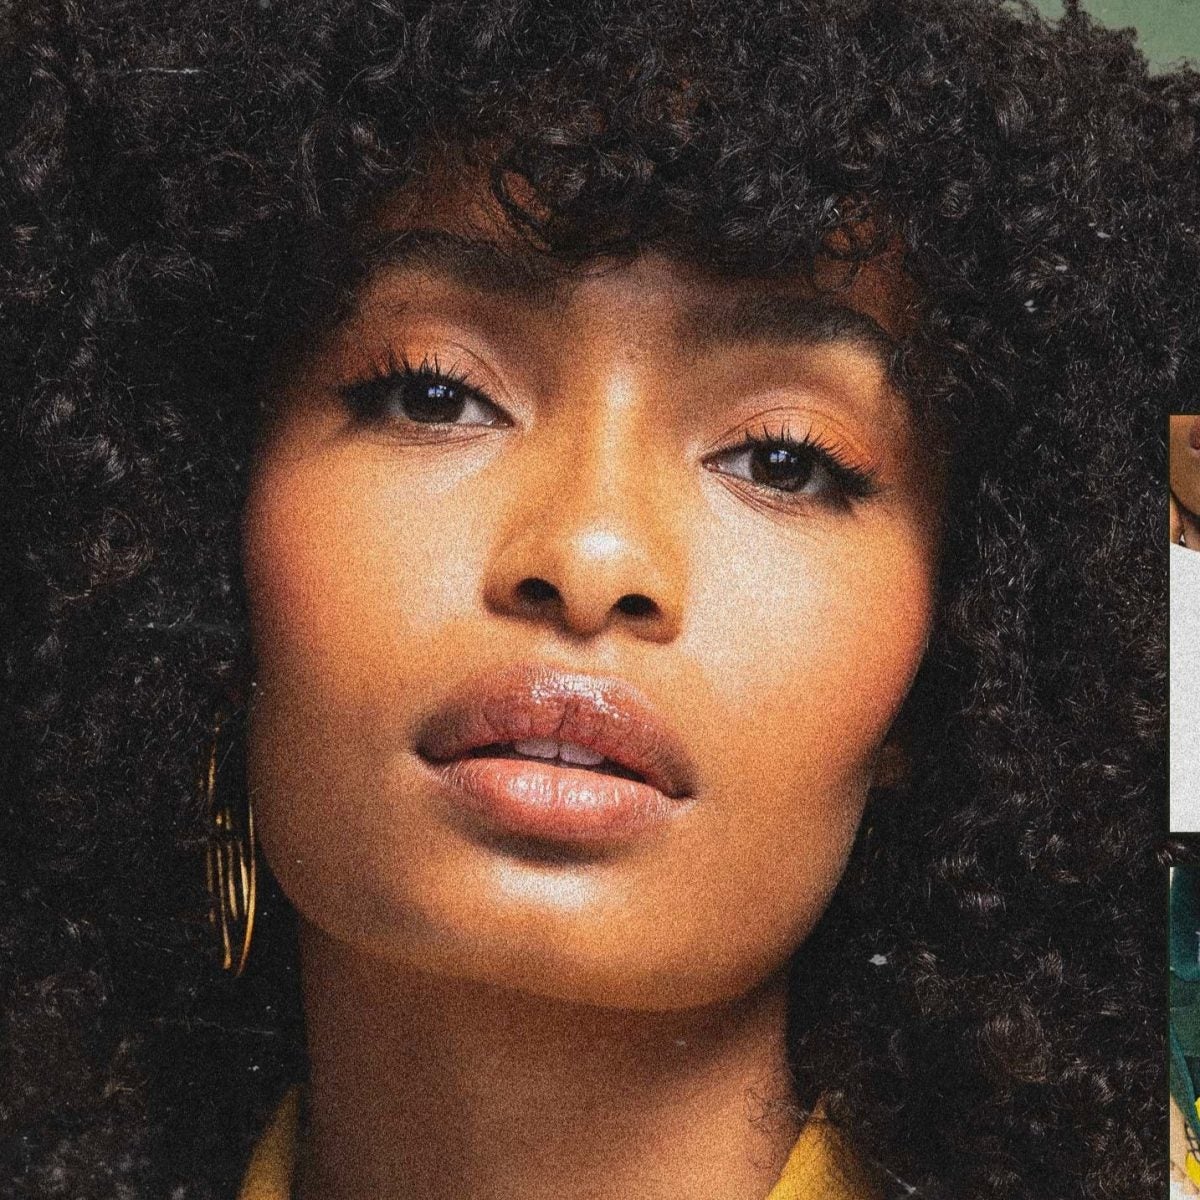 Yara Shahidi's Second Collection With Adidas Originals Is Almost Here